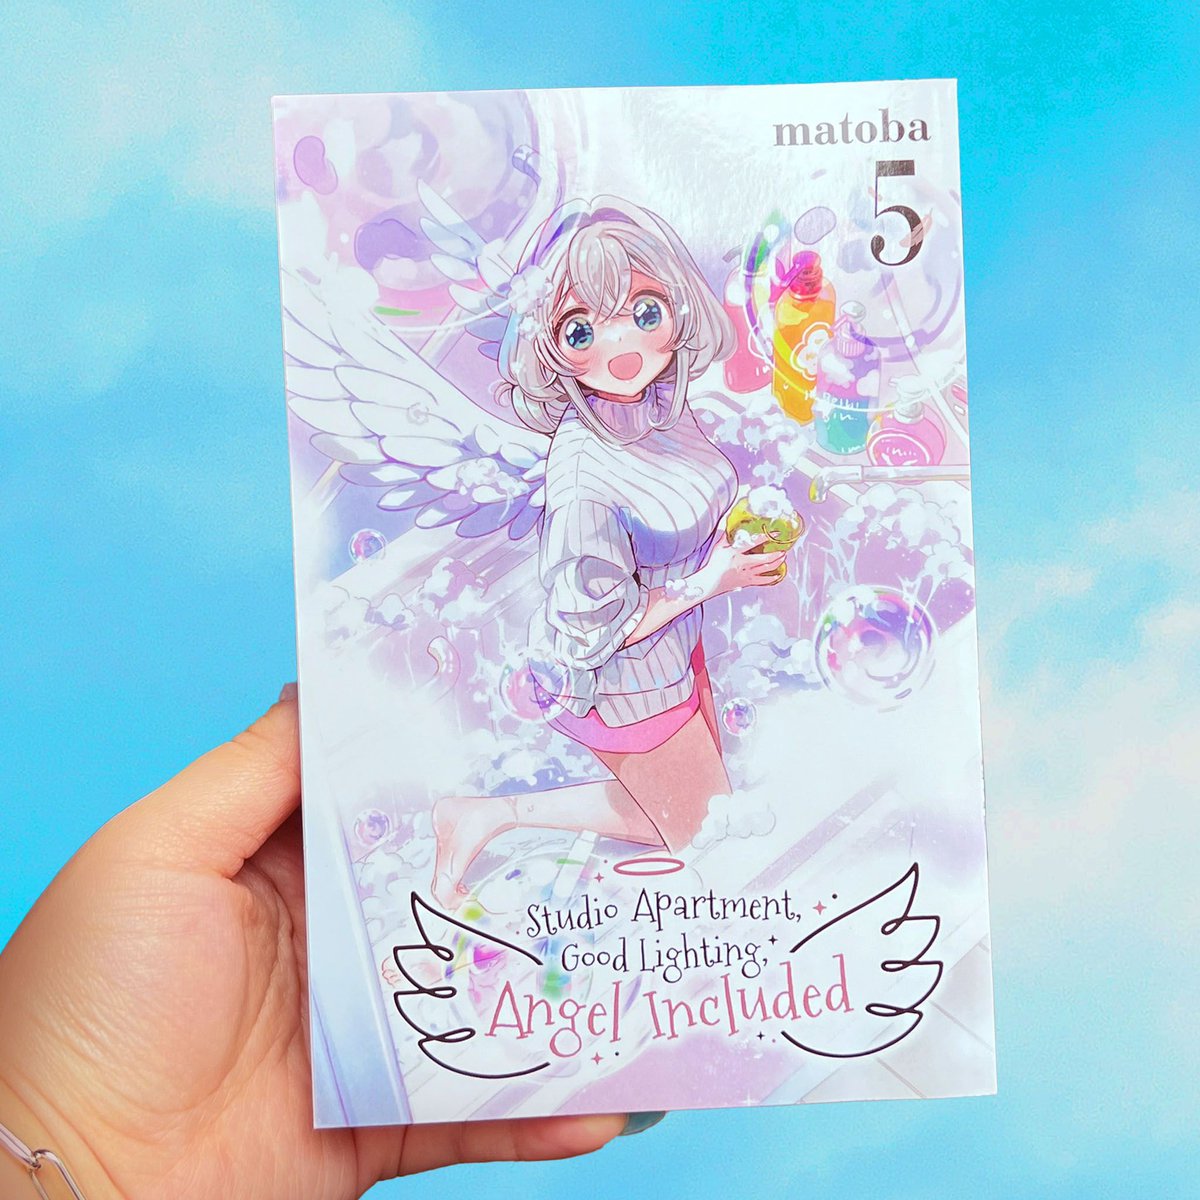 Towa's flying high in the sky! 🪶 And you can too because Studio Apartment, Good Lighting, Angel Included, Vol. 5 is available now! Grab your own copy of this angelic book 😇👉 buff.ly/3SnHkvC